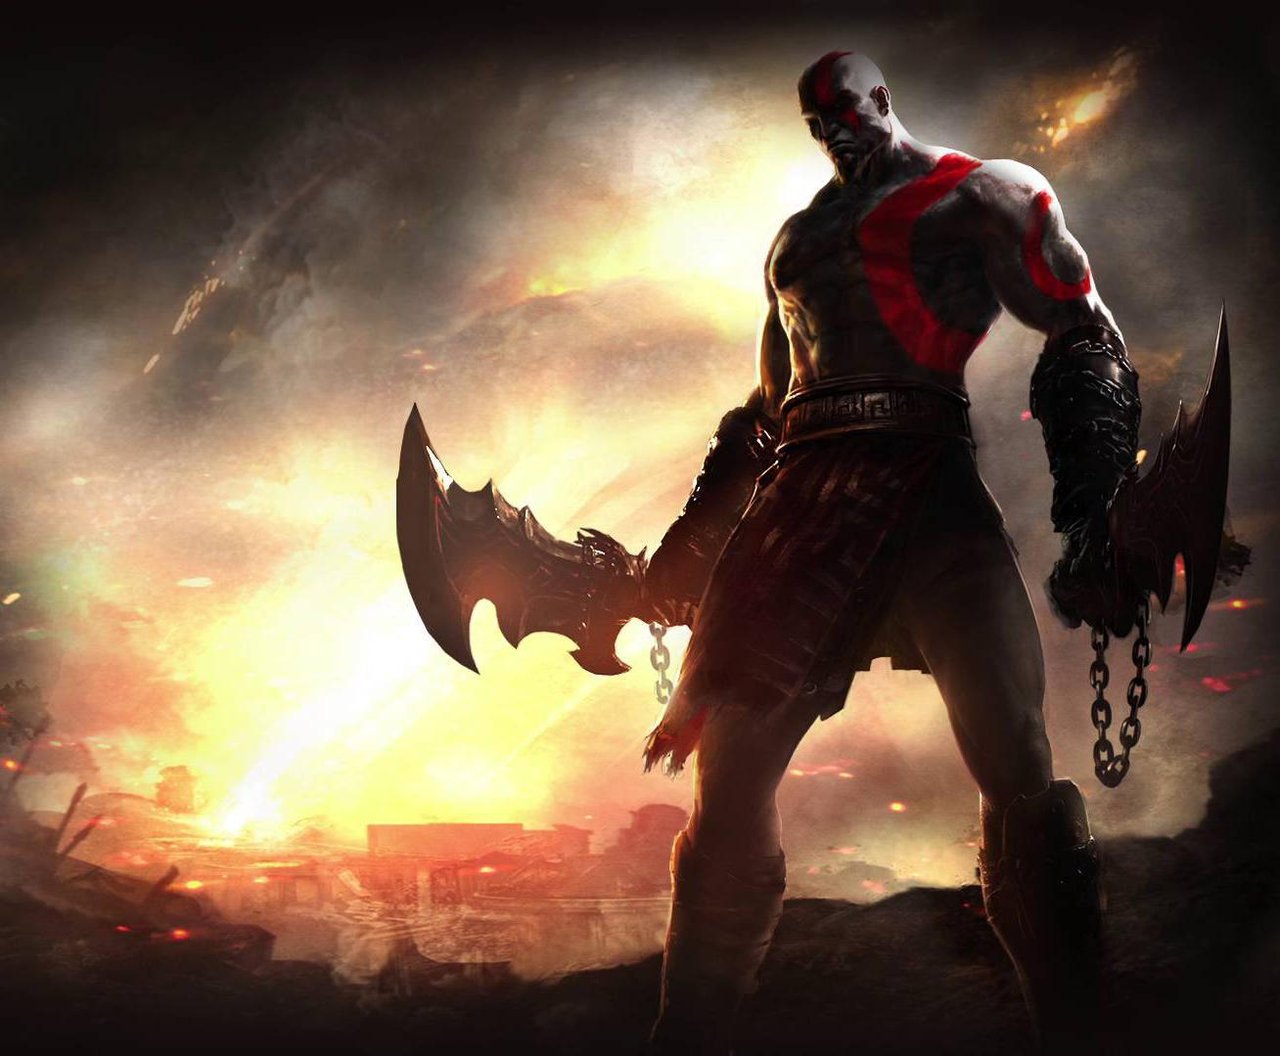 god of war ghost of sparta system requirements pc